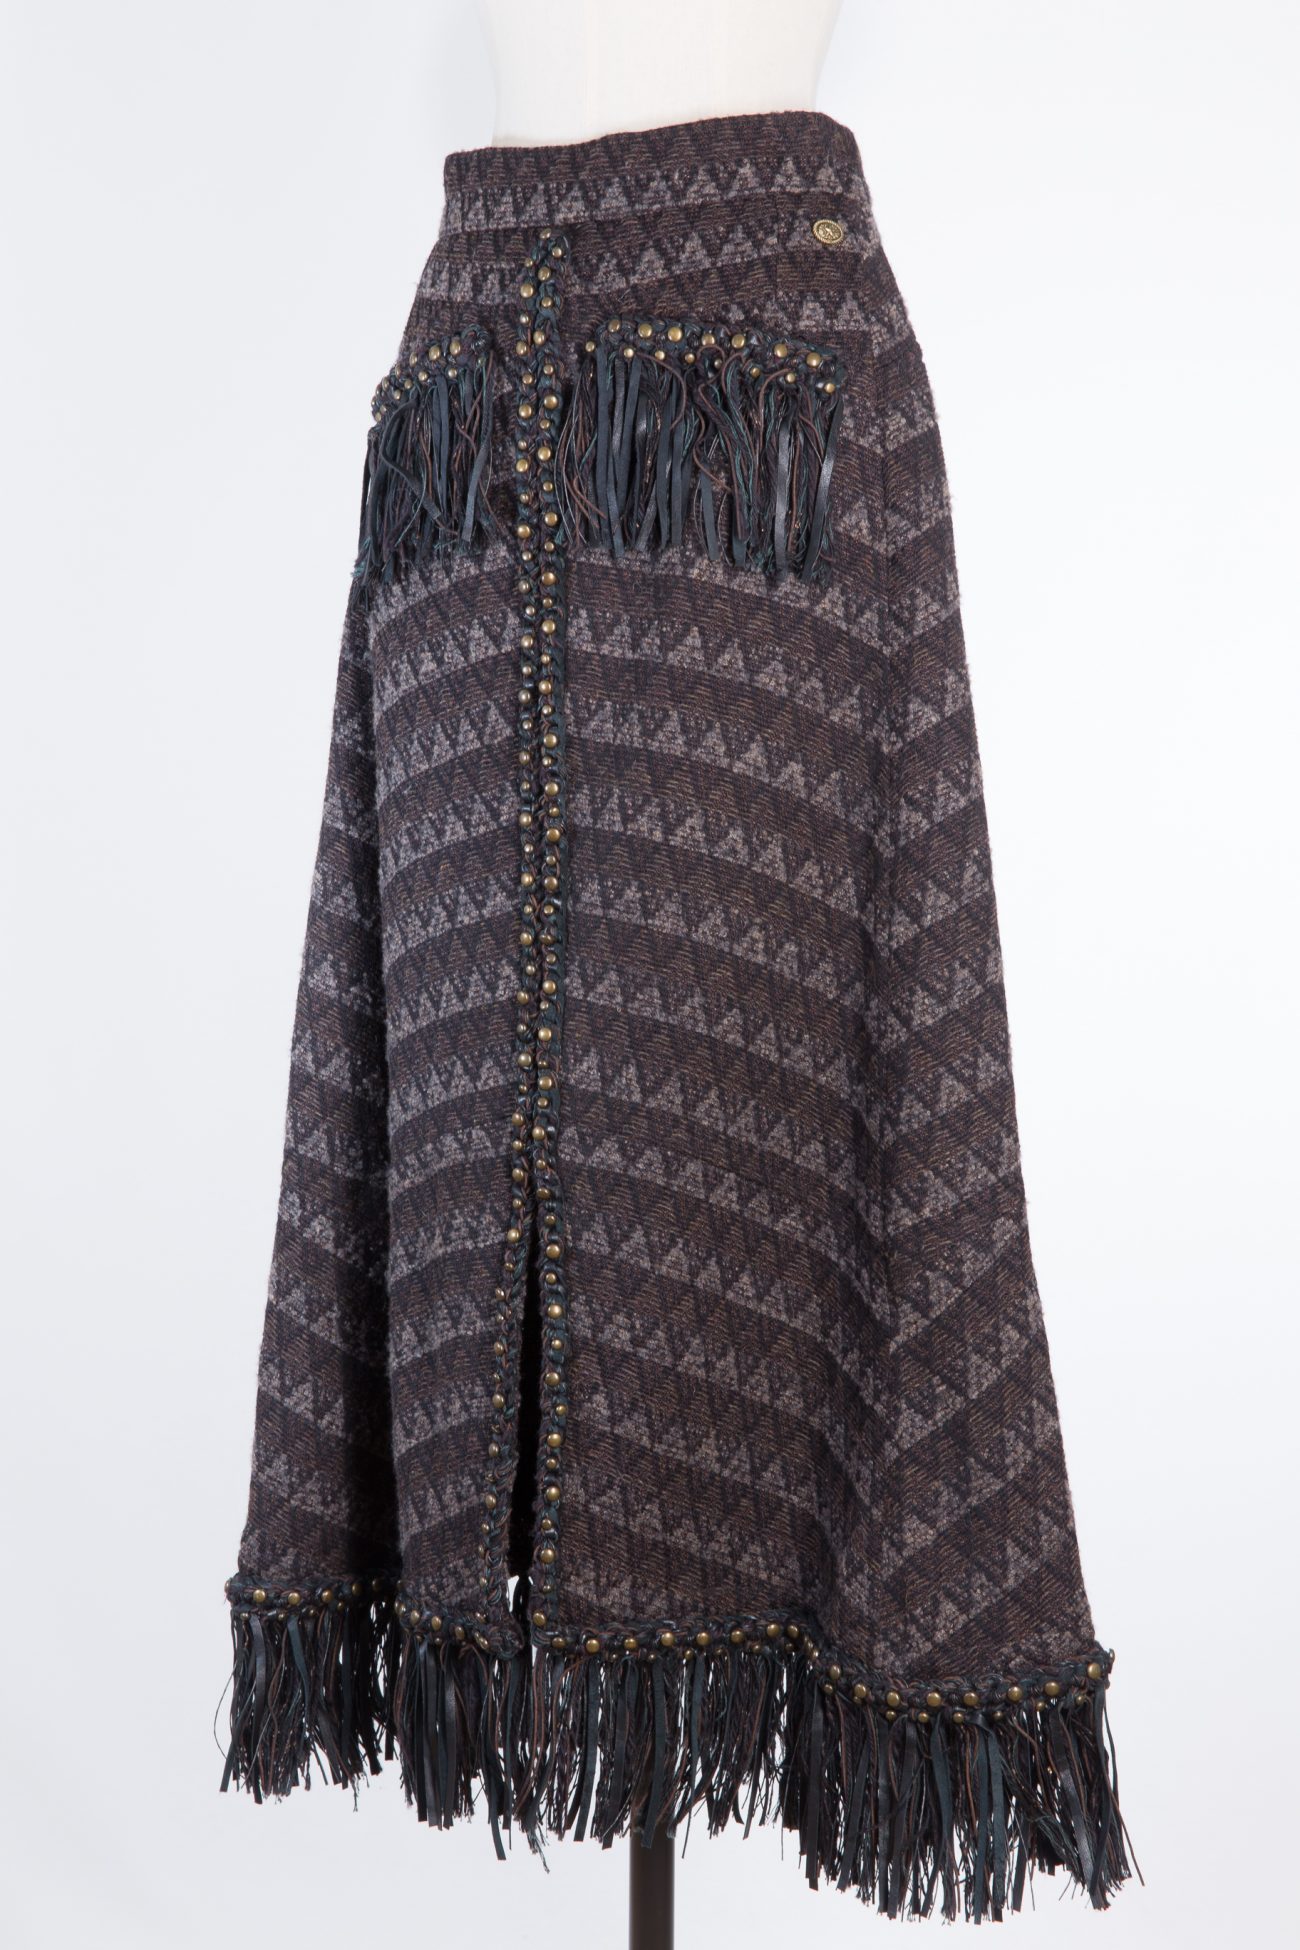 Chanel Skirt, FR40 - Huntessa Luxury Online Consignment Boutique